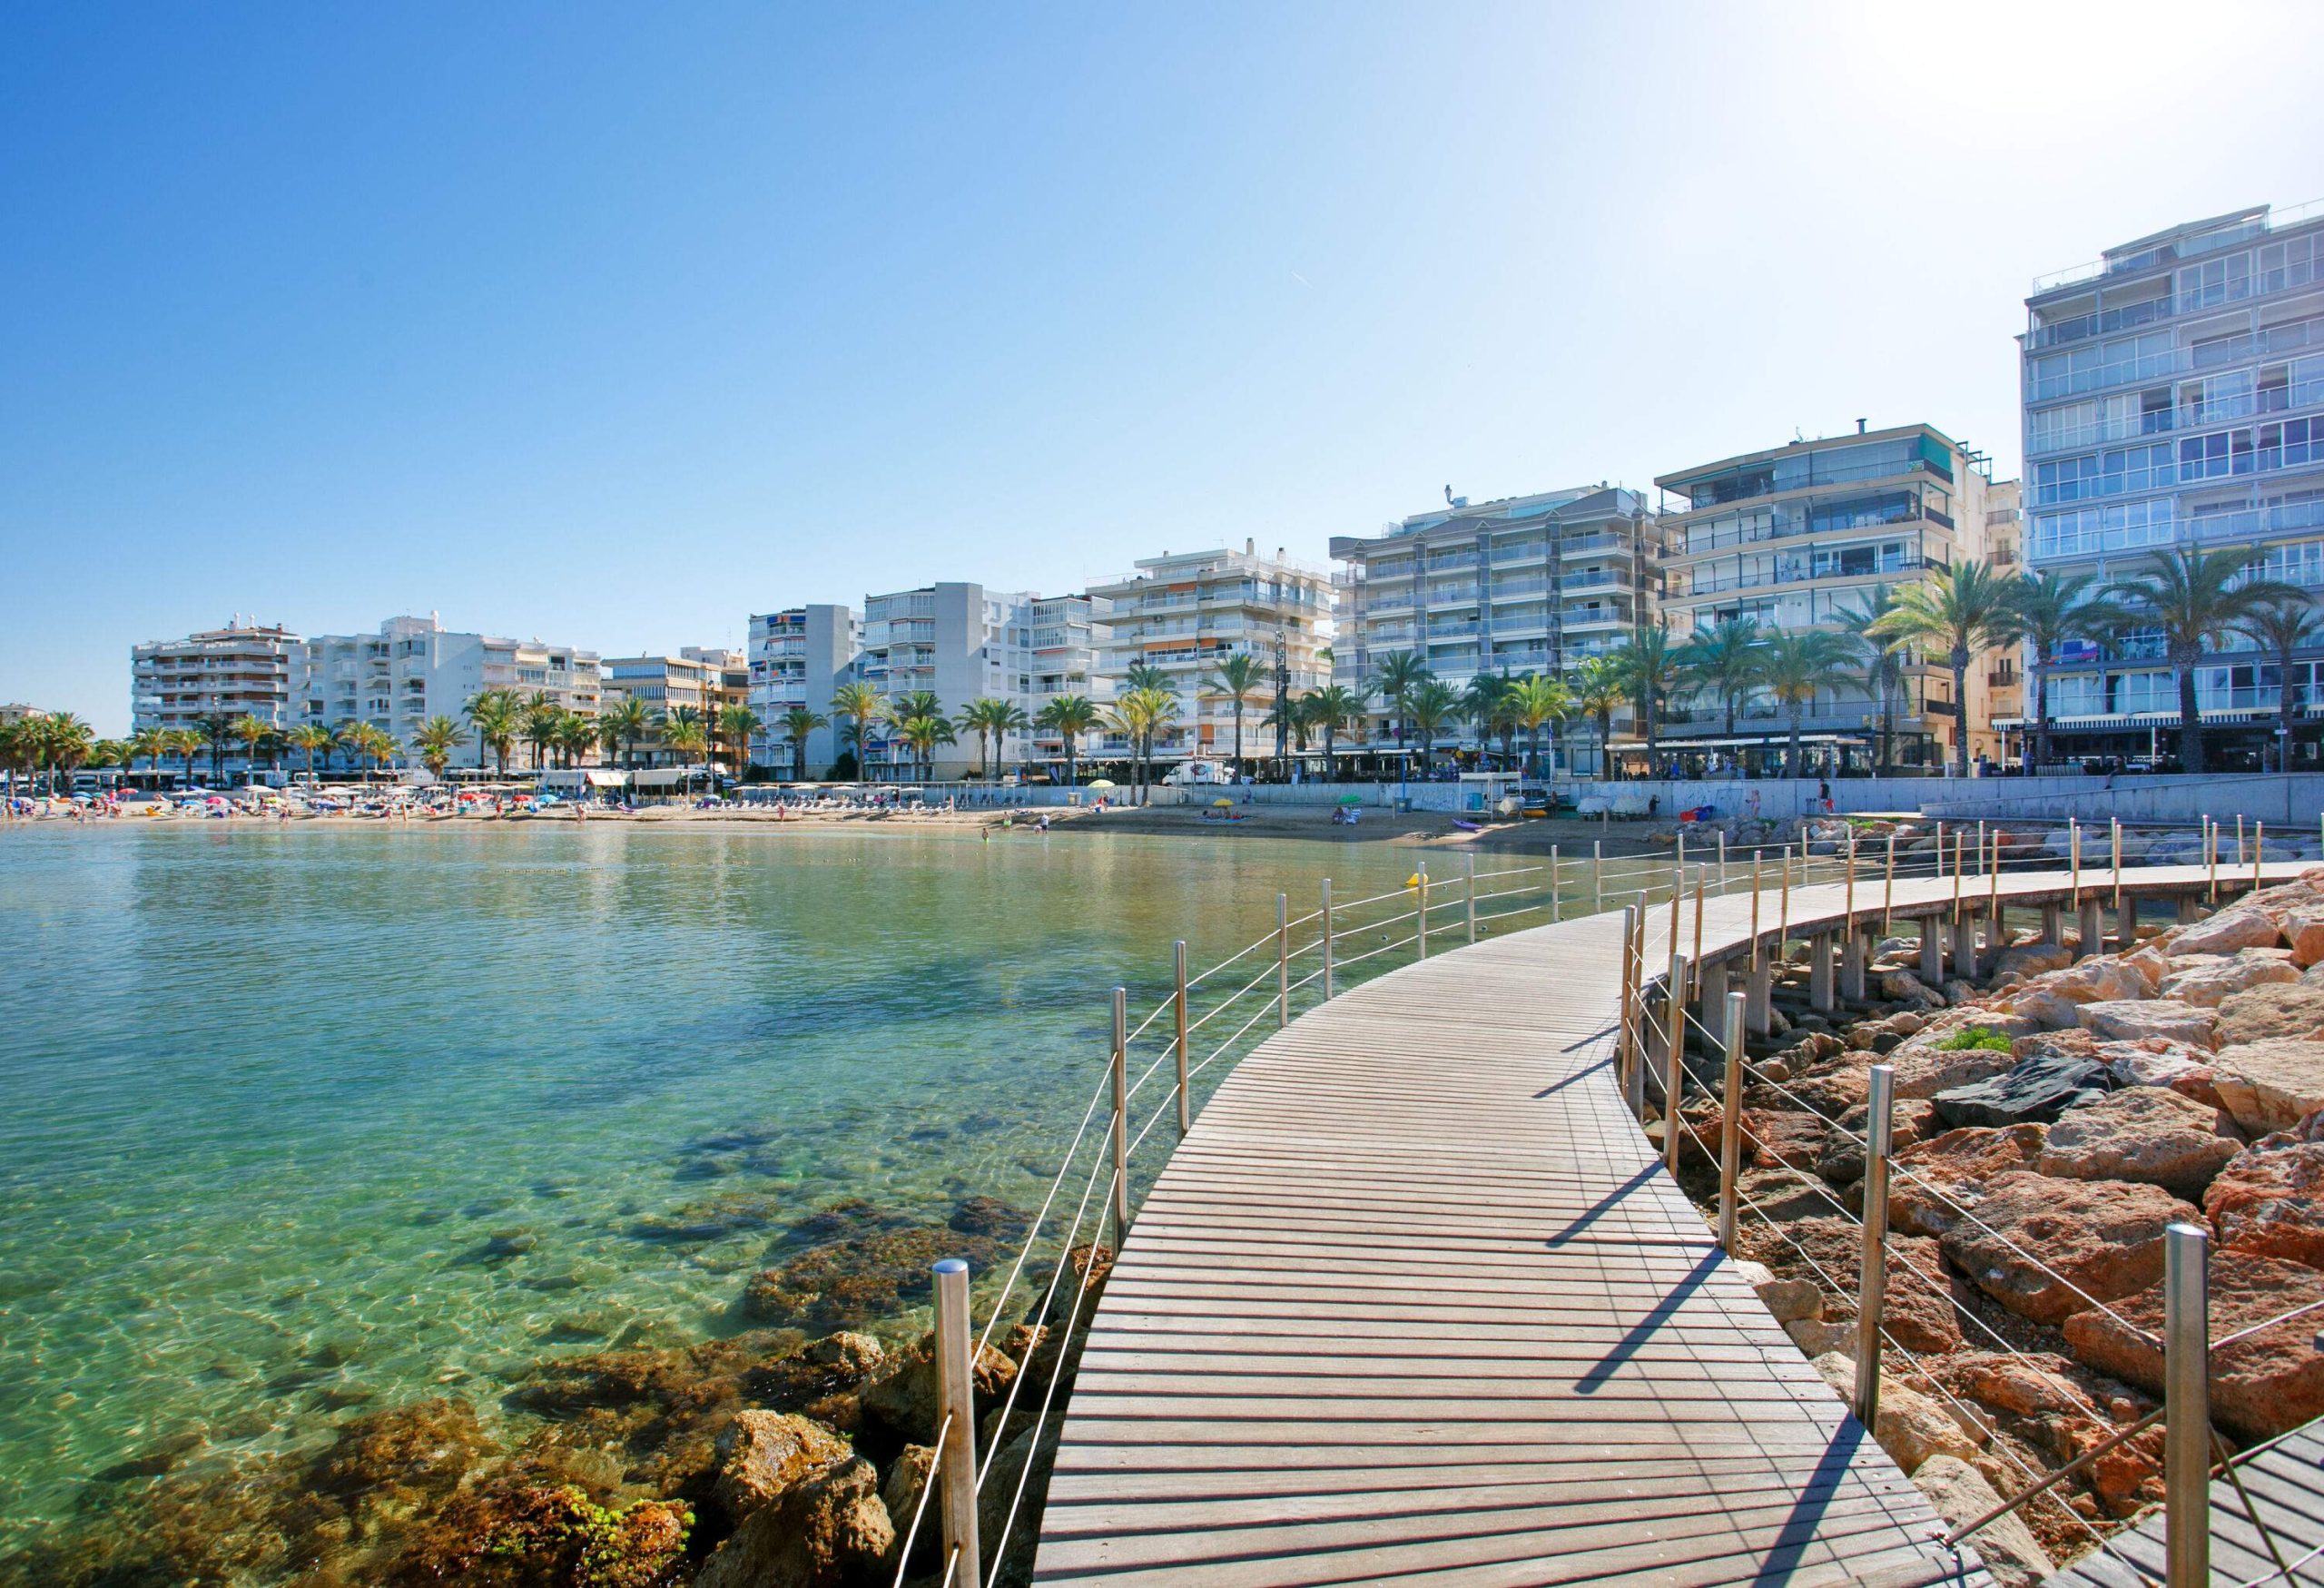 A boardwalk runs across the crystal-clear water to the coastline, where it connects to a complex of multi-storey buildings and a palm tree-lined coastal road.